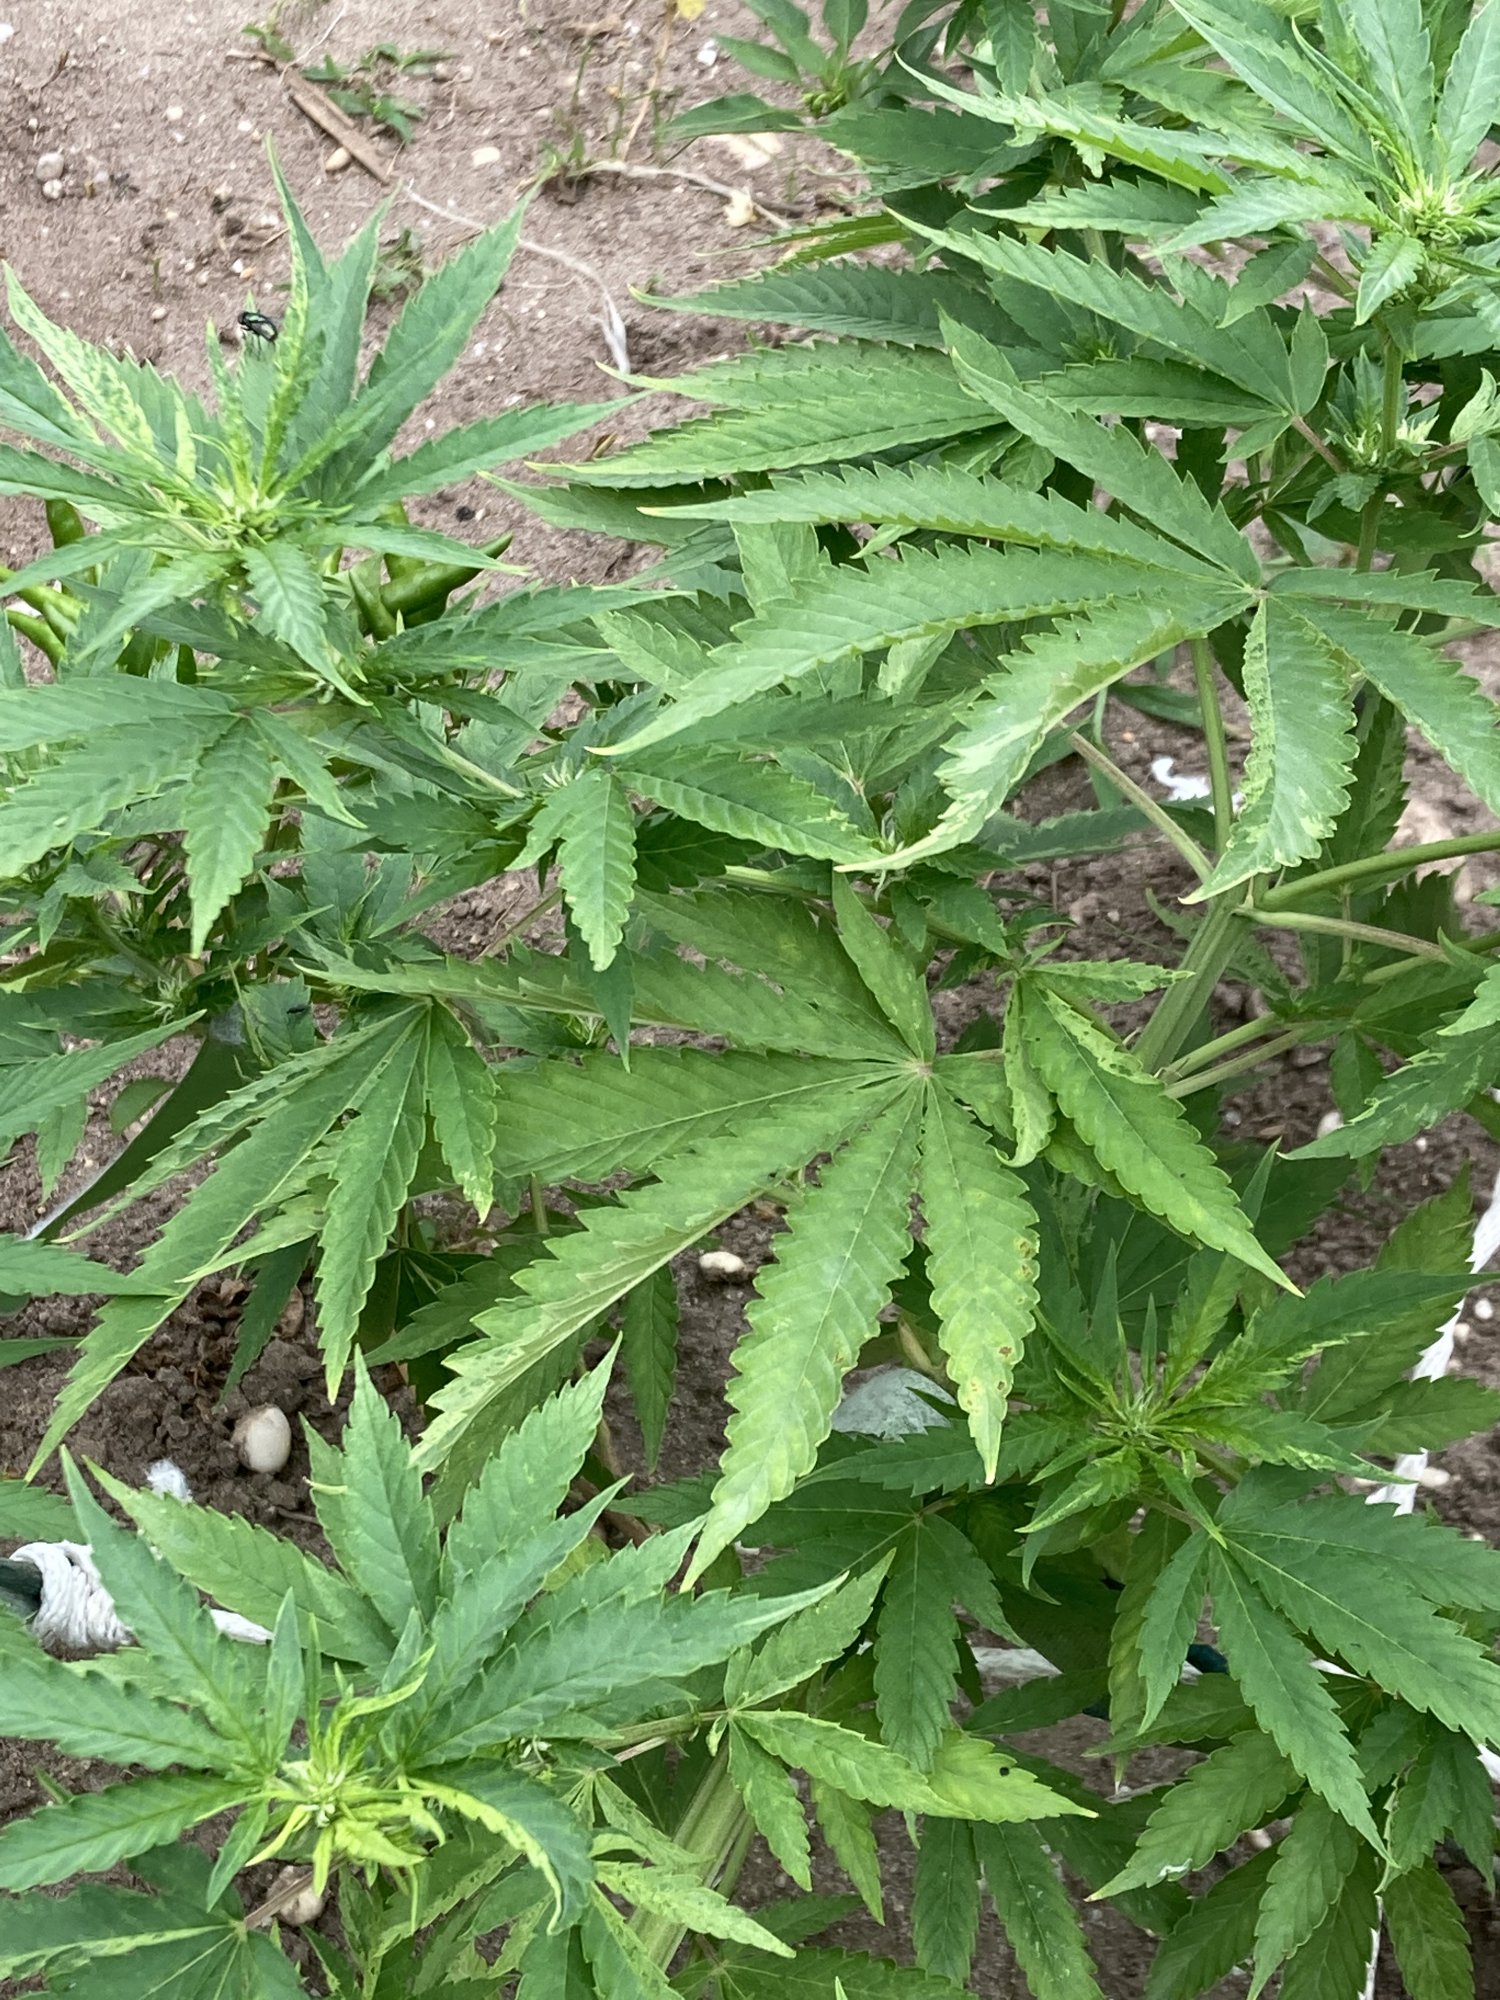 Unsure of nutrient burn or possible other issue outdoors first grow 4